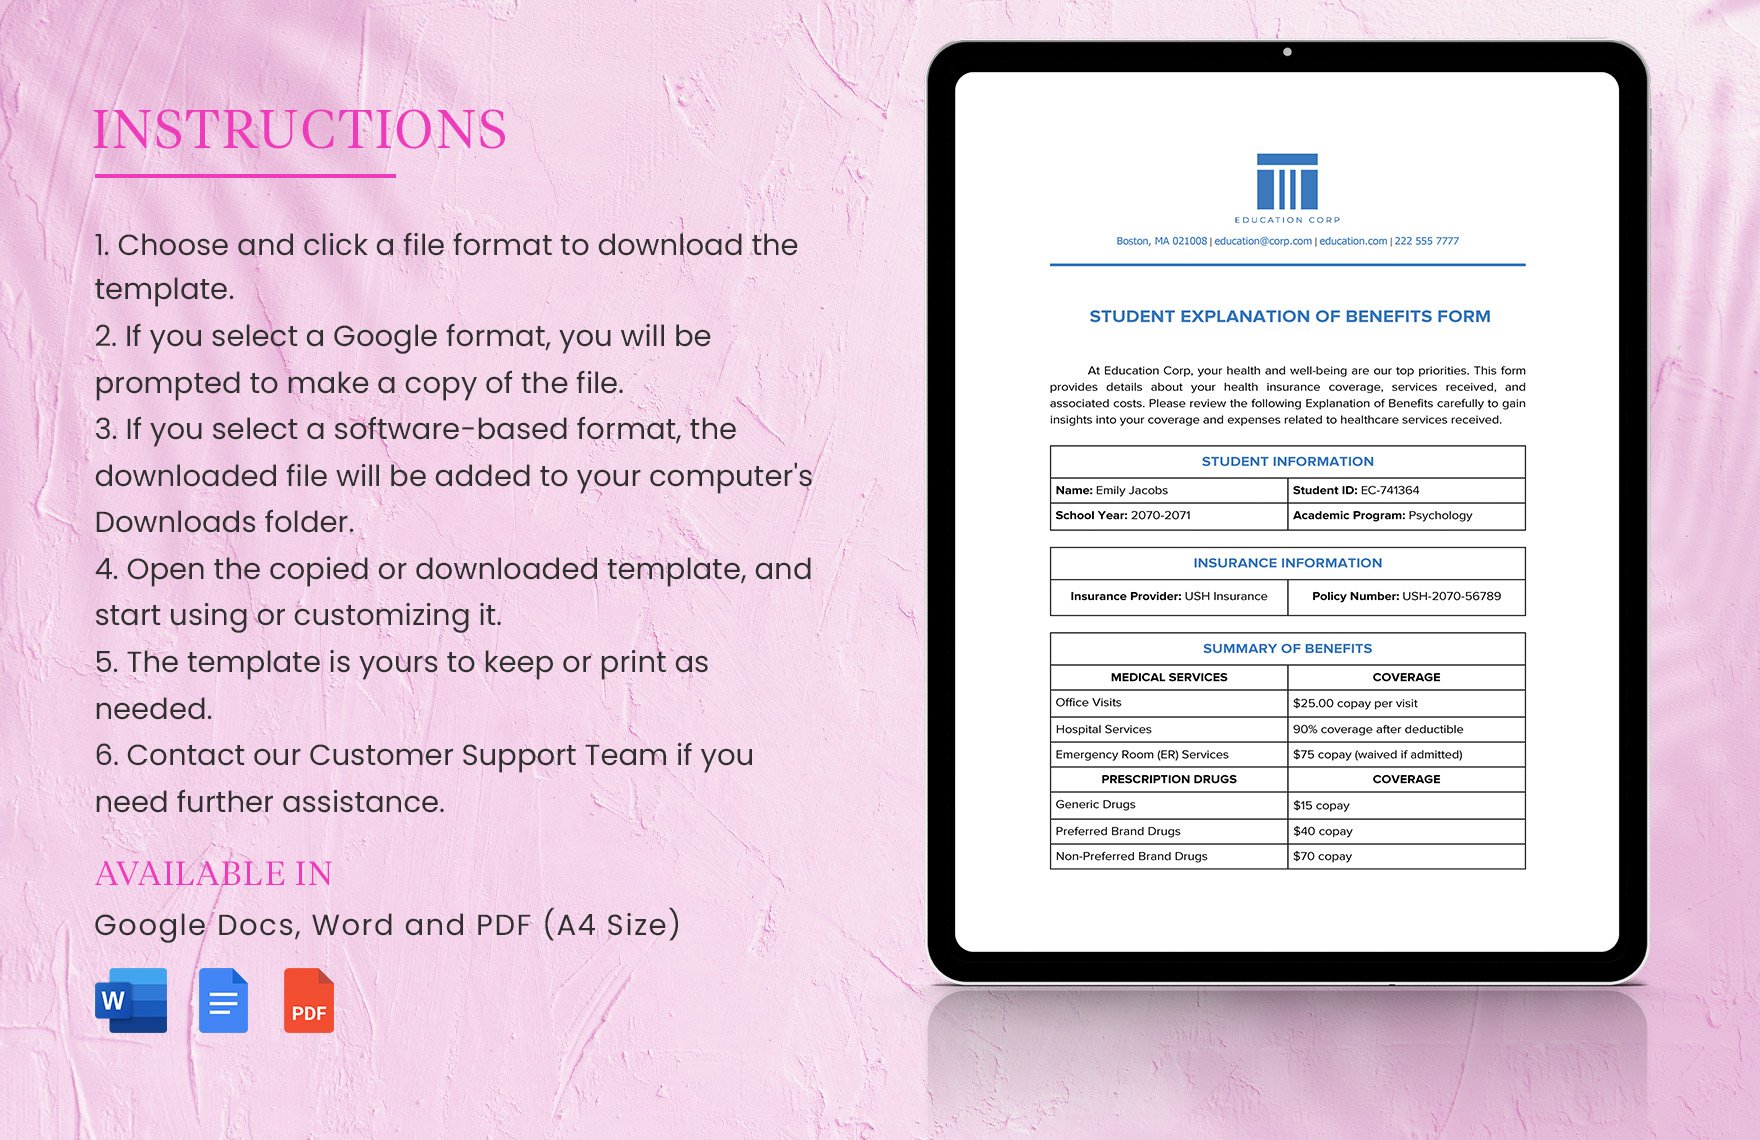 Student Explanation of Benefits Form Template